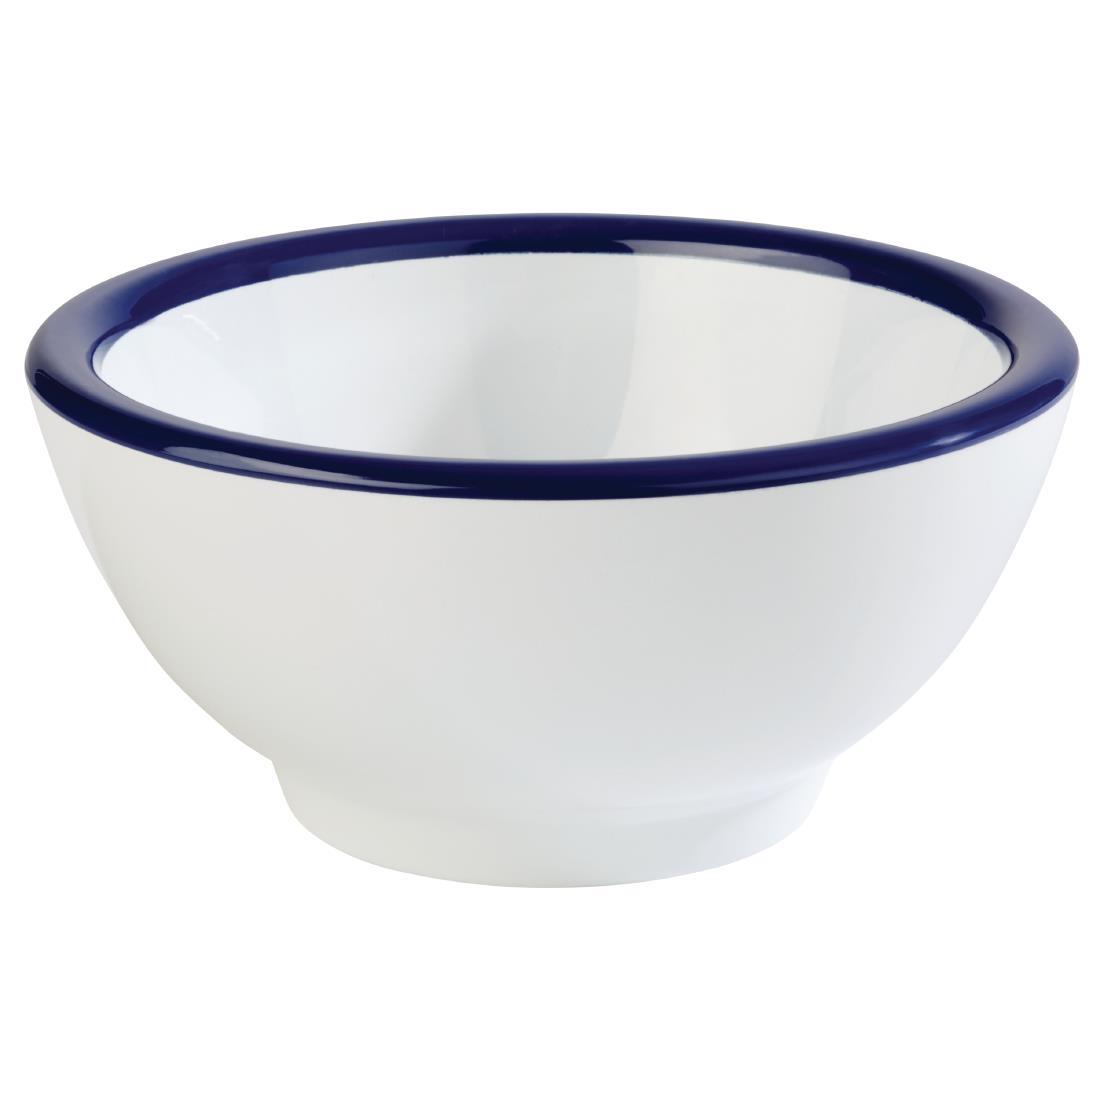 APS Pure Bowl White And Blue 130(D) x 65(H) 0.3Ltr (B2B) - FC986  - 1